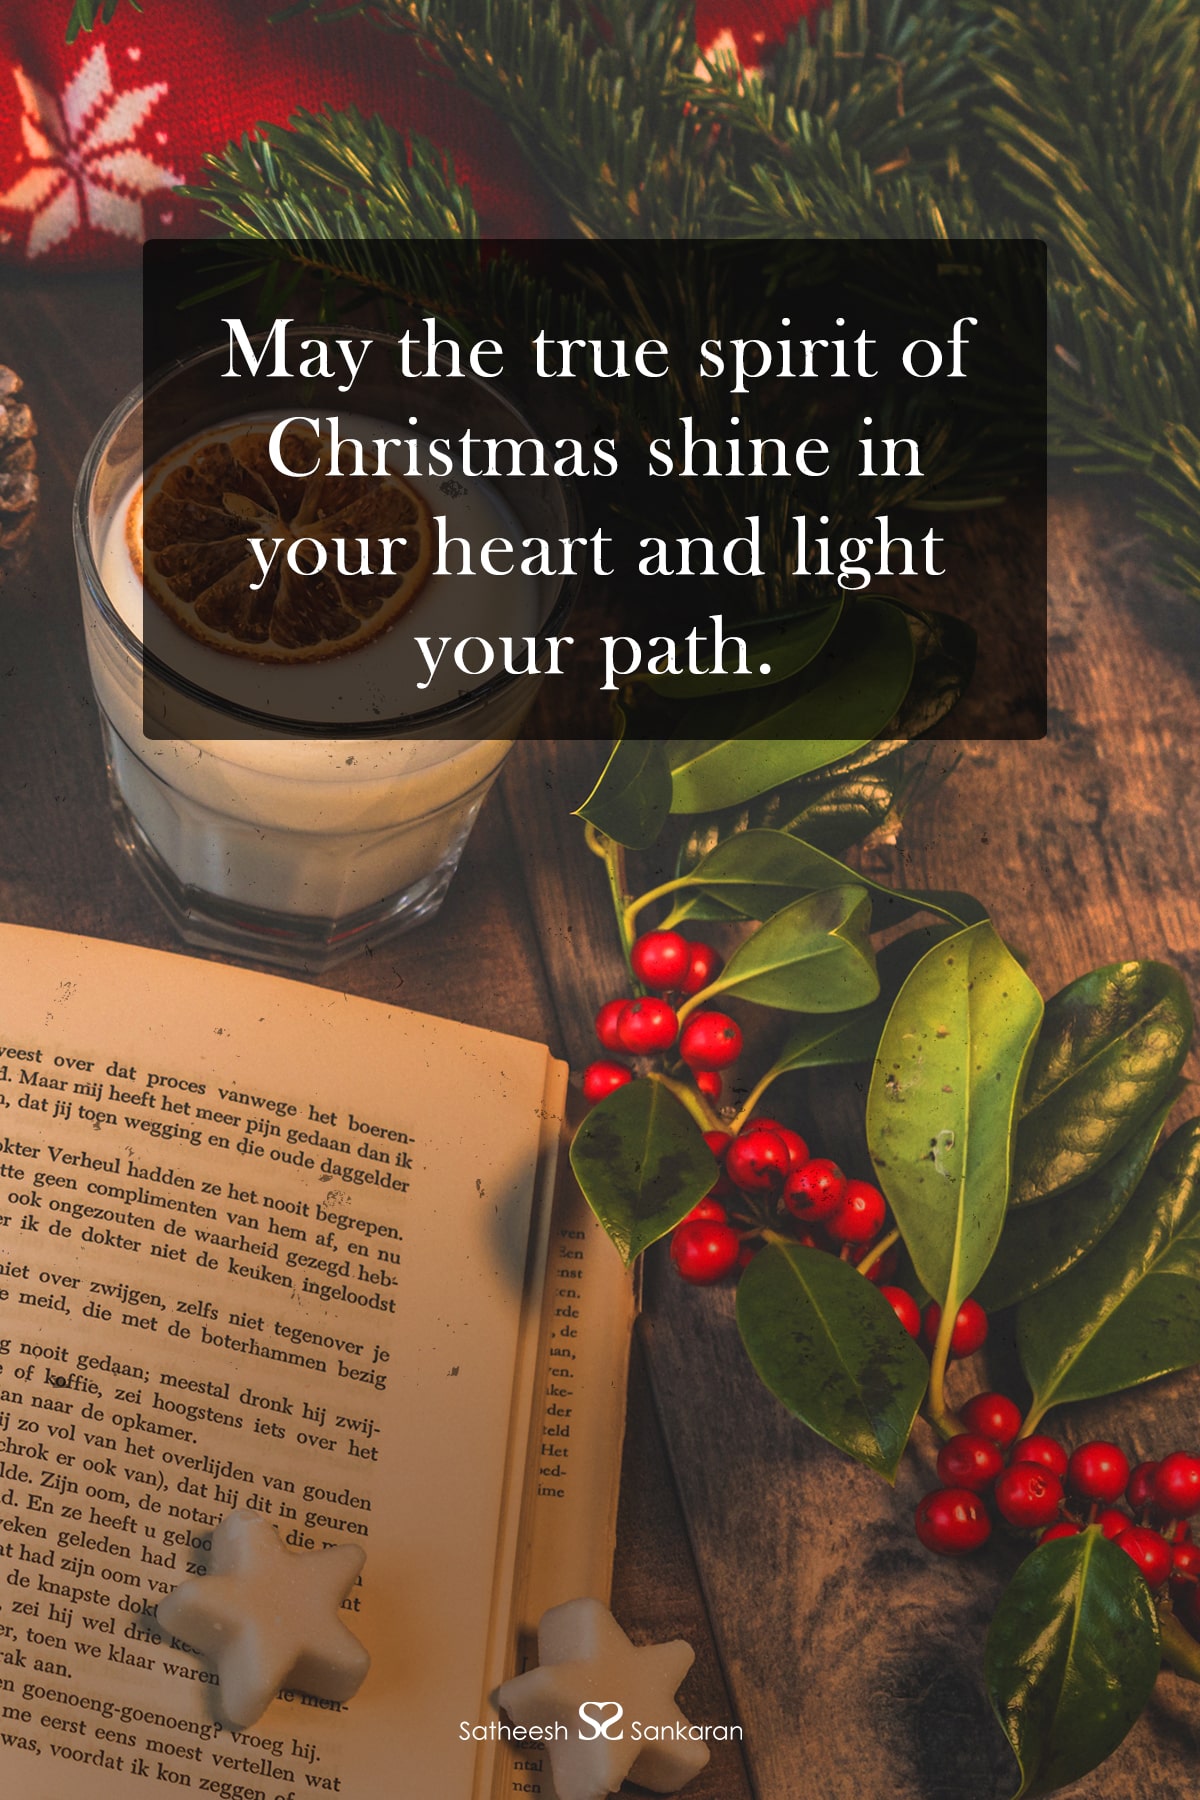 May the true spirit of Christmas shine in your heart and light your path.